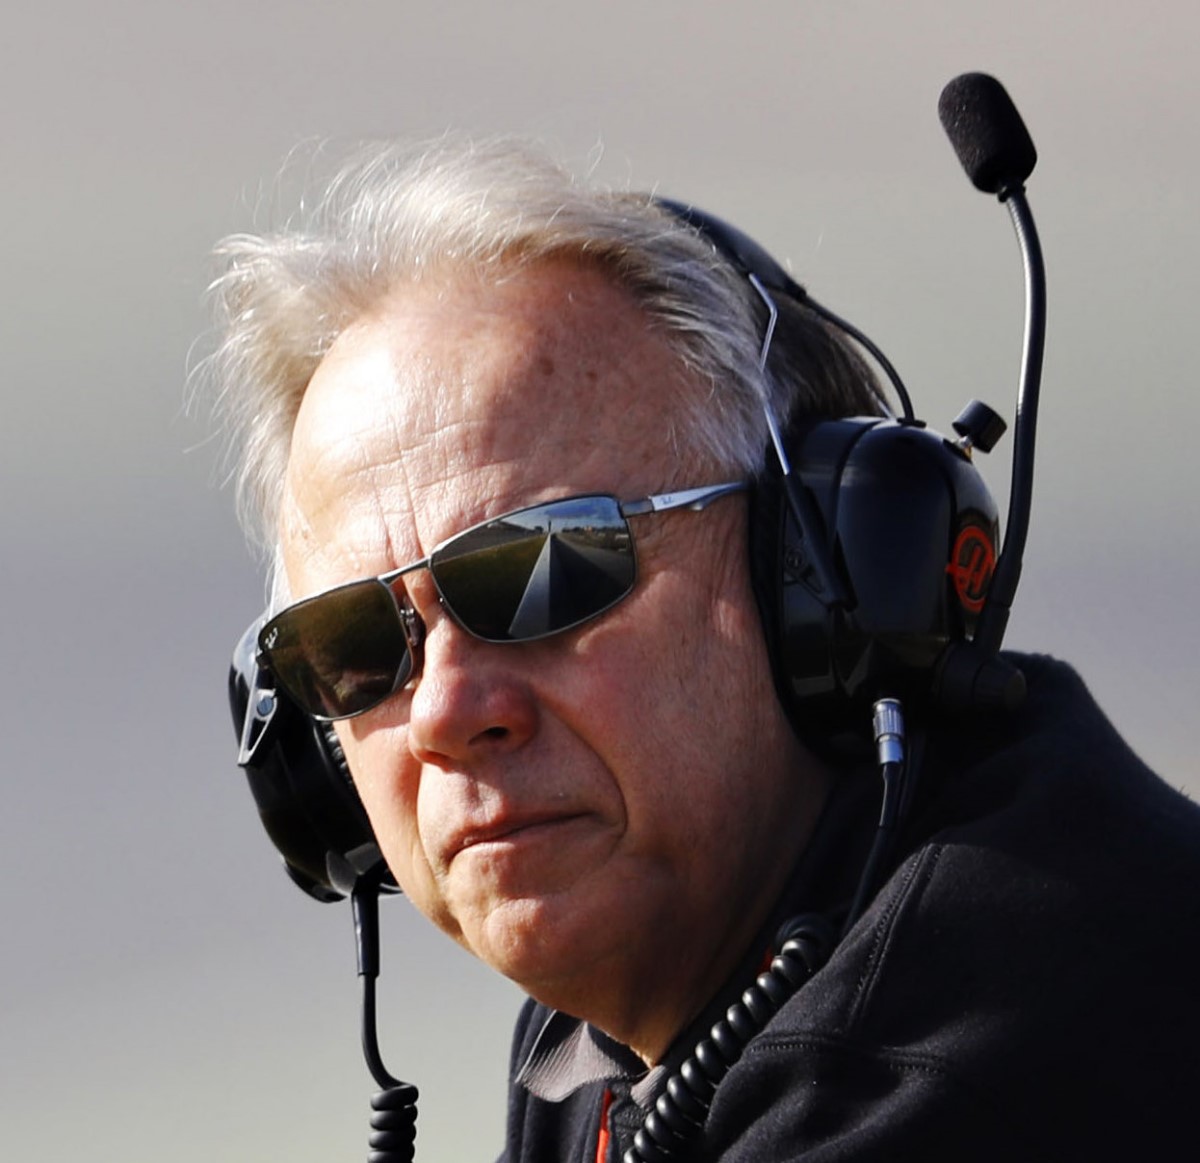 Haas has learned that F1 is an engineering exercise. In NASCAR driver skill is paramount